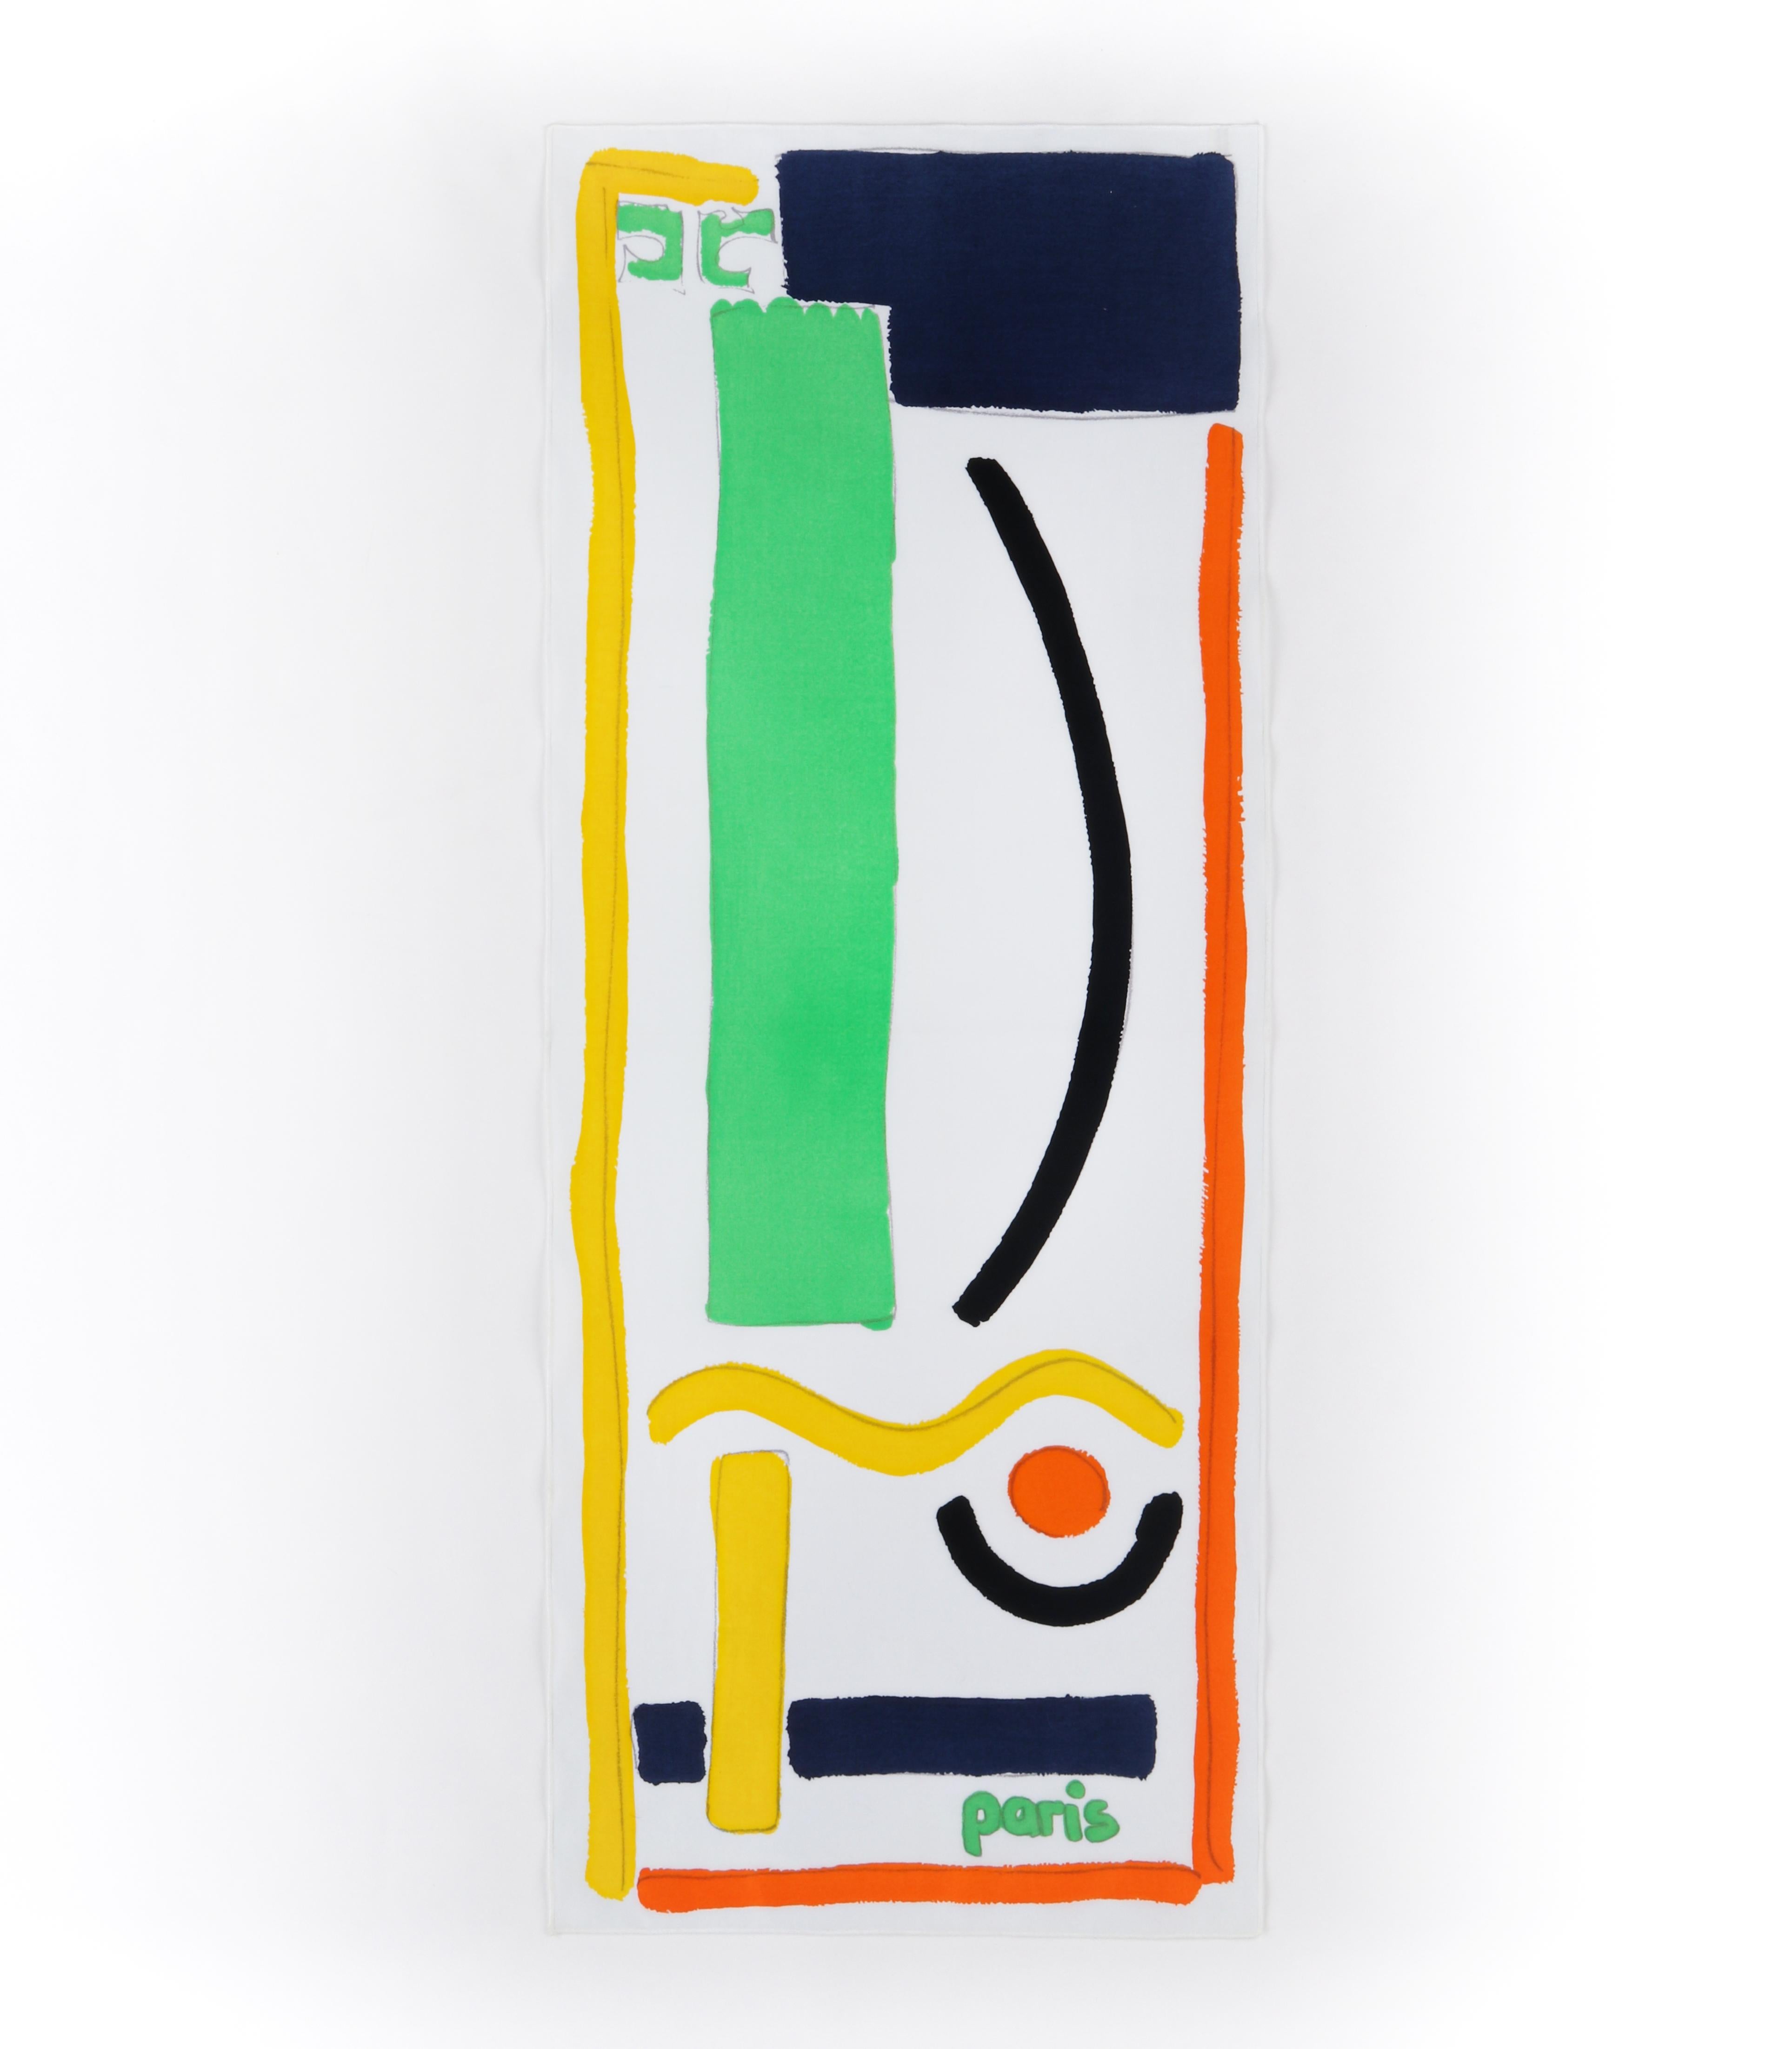 COURREGES c.1970’s White Abstract Painted Multicolor Shape Print Wrap Scarf
Circa: 1970’s
Brand/Manufacturer: Courreges
Designer: Andre Courreges
Style: Oblong wrap scarf
Color(s): Shades of white, green, blue, black and orange
Lined: No
Unmarked